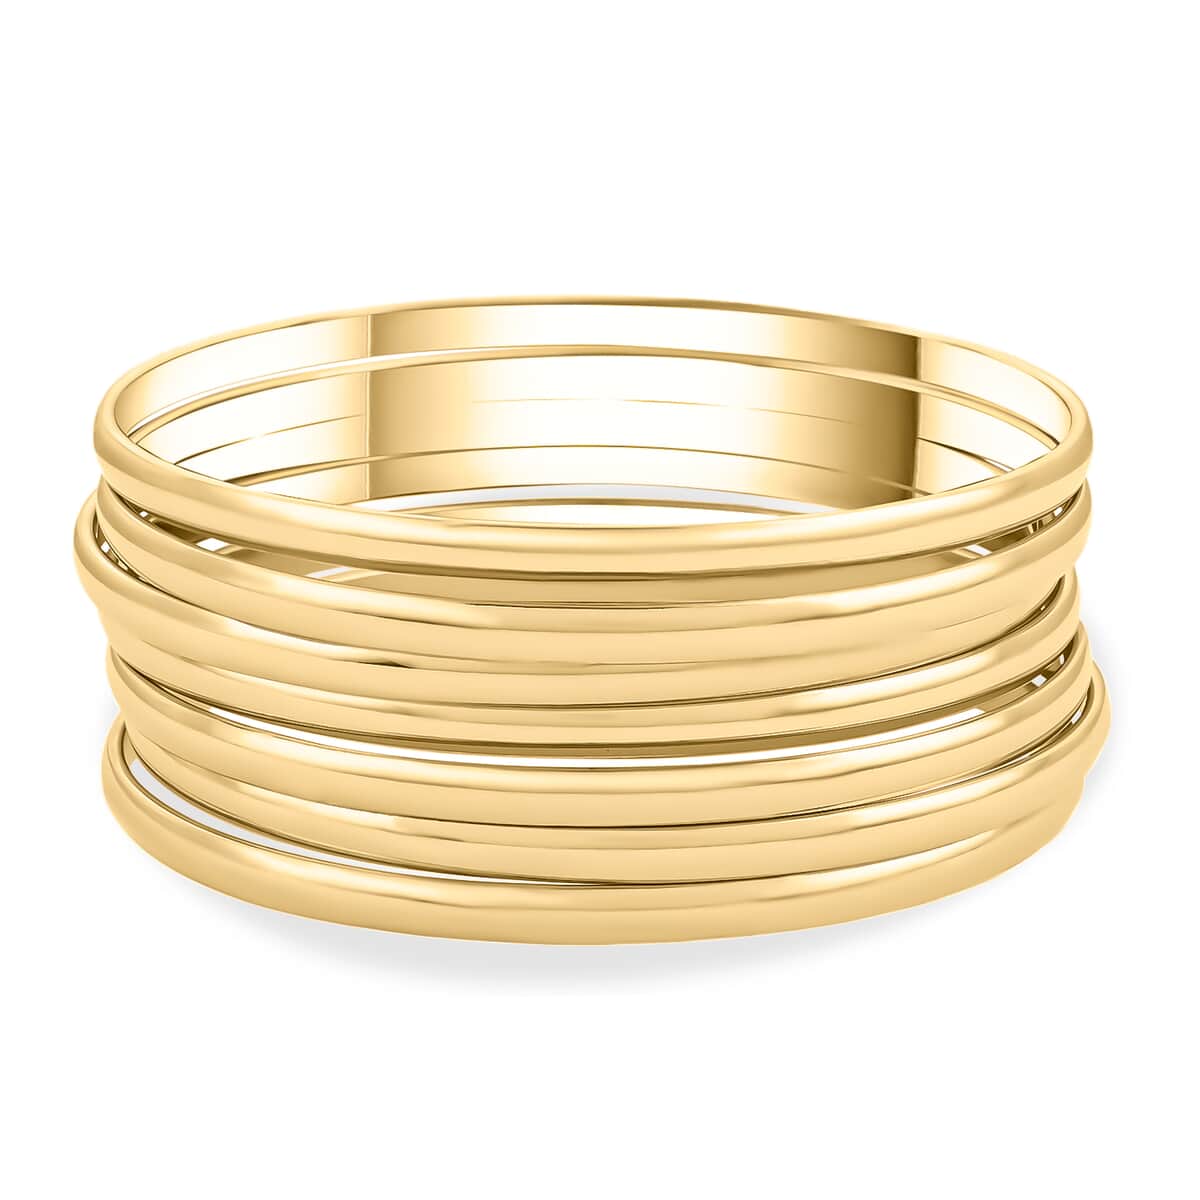 7 Stack Bangle Bracelet in ION Plated Yellow Gold Stainless Steel (8.00 In) 72.80 Grams image number 0